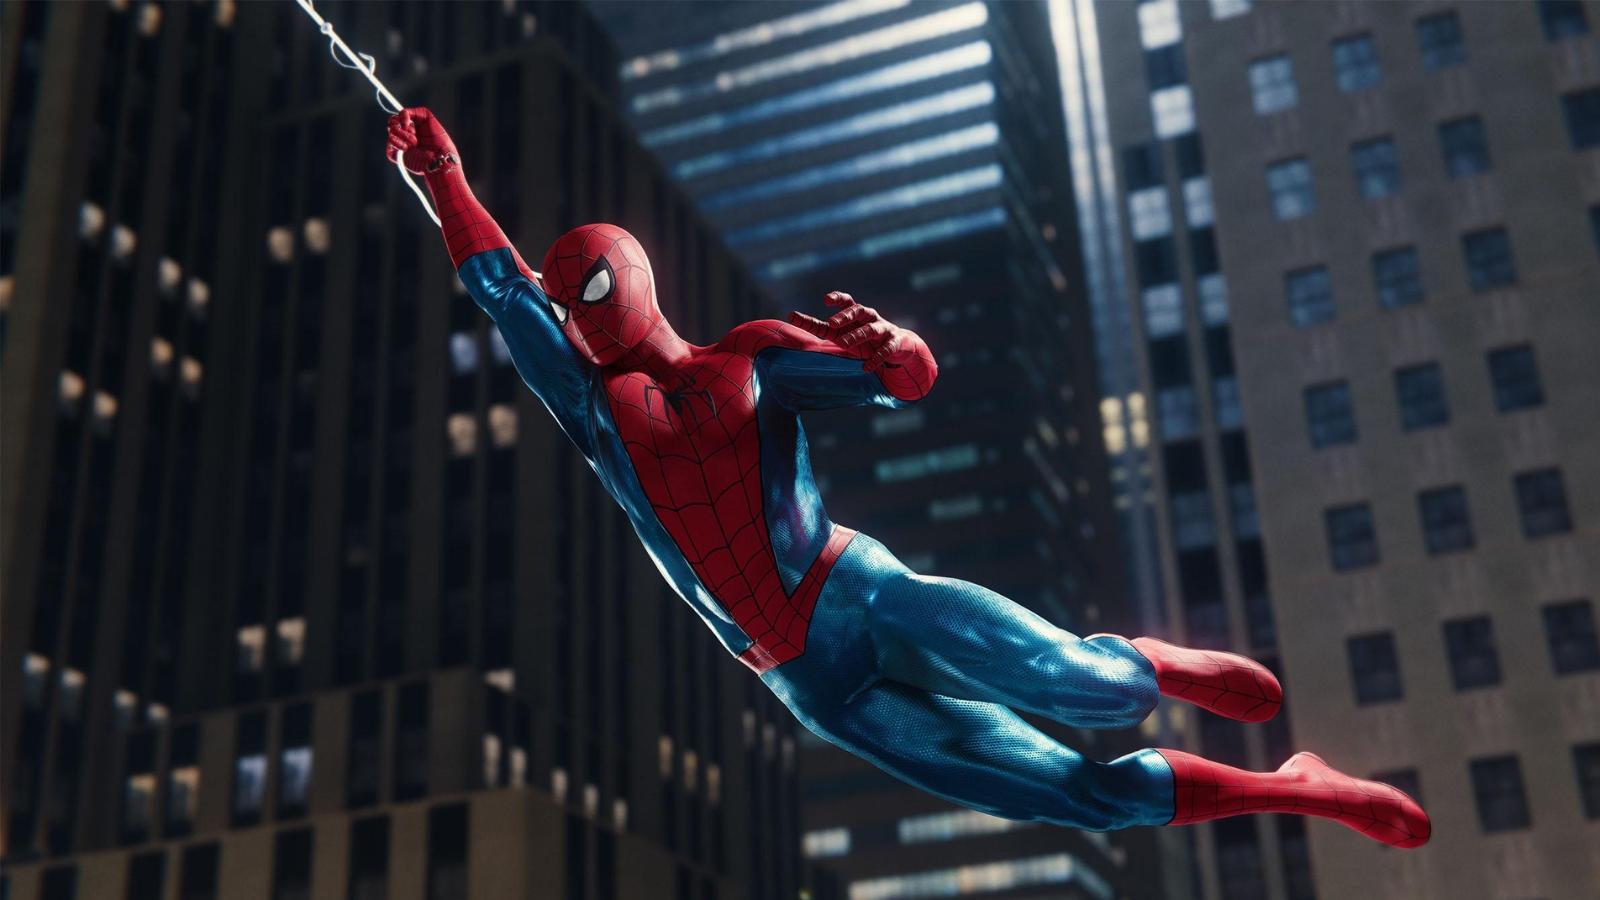 How to get the No Way Home suit in Marvel's Spider-Man 2 - Dexerto